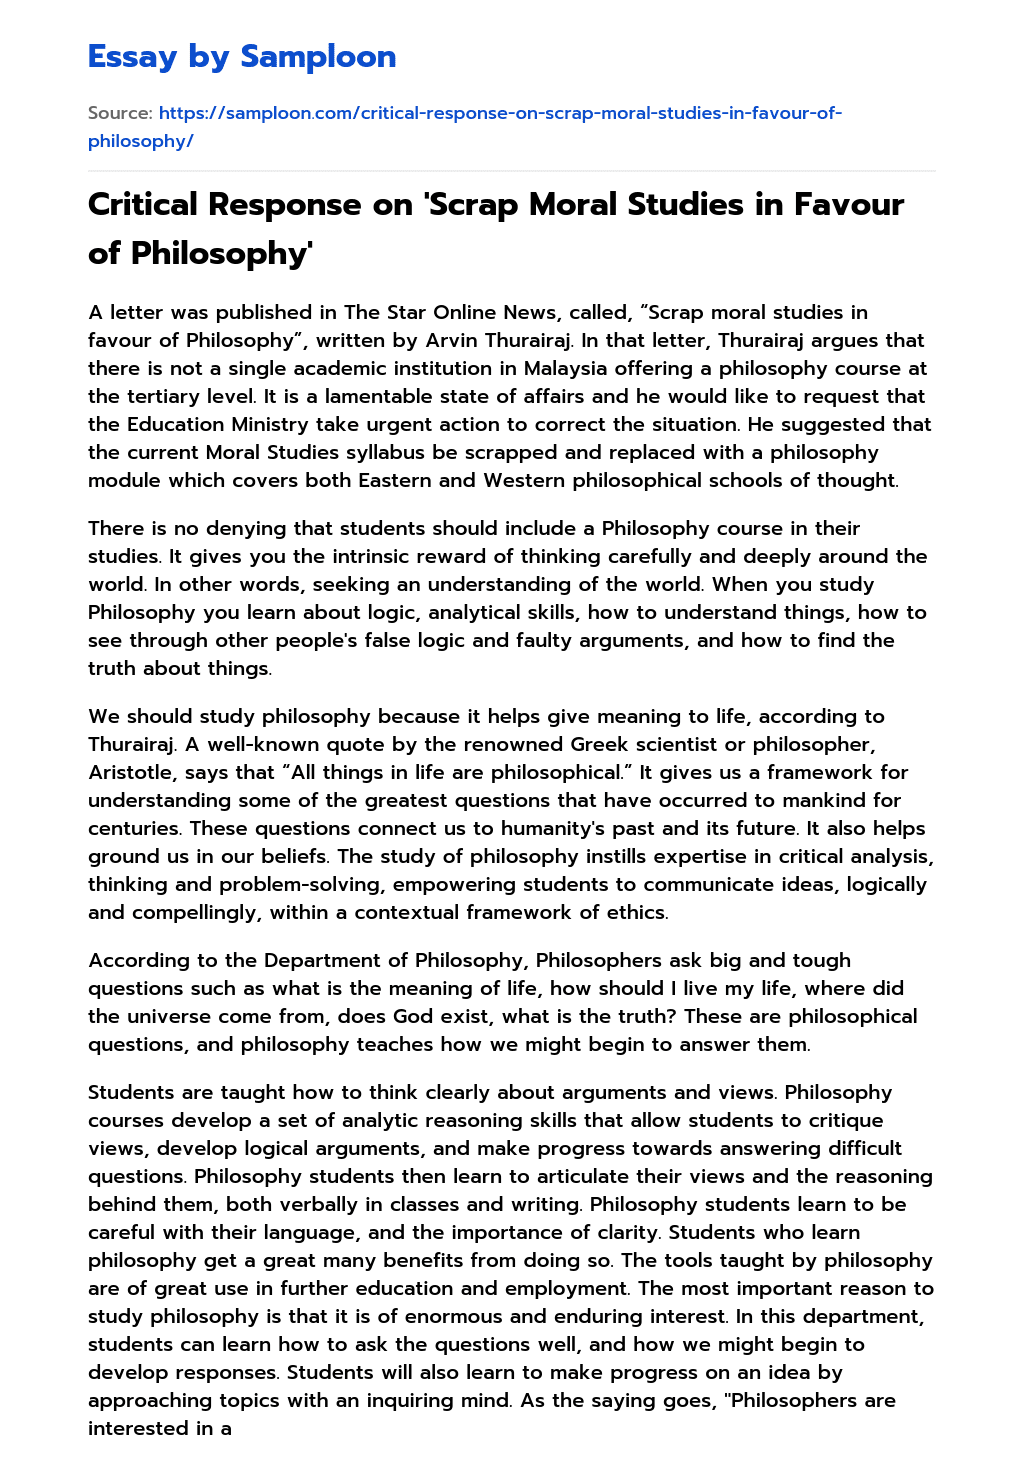 Critical Response on ‘Scrap Moral Studies in Favour of Philosophy’ essay